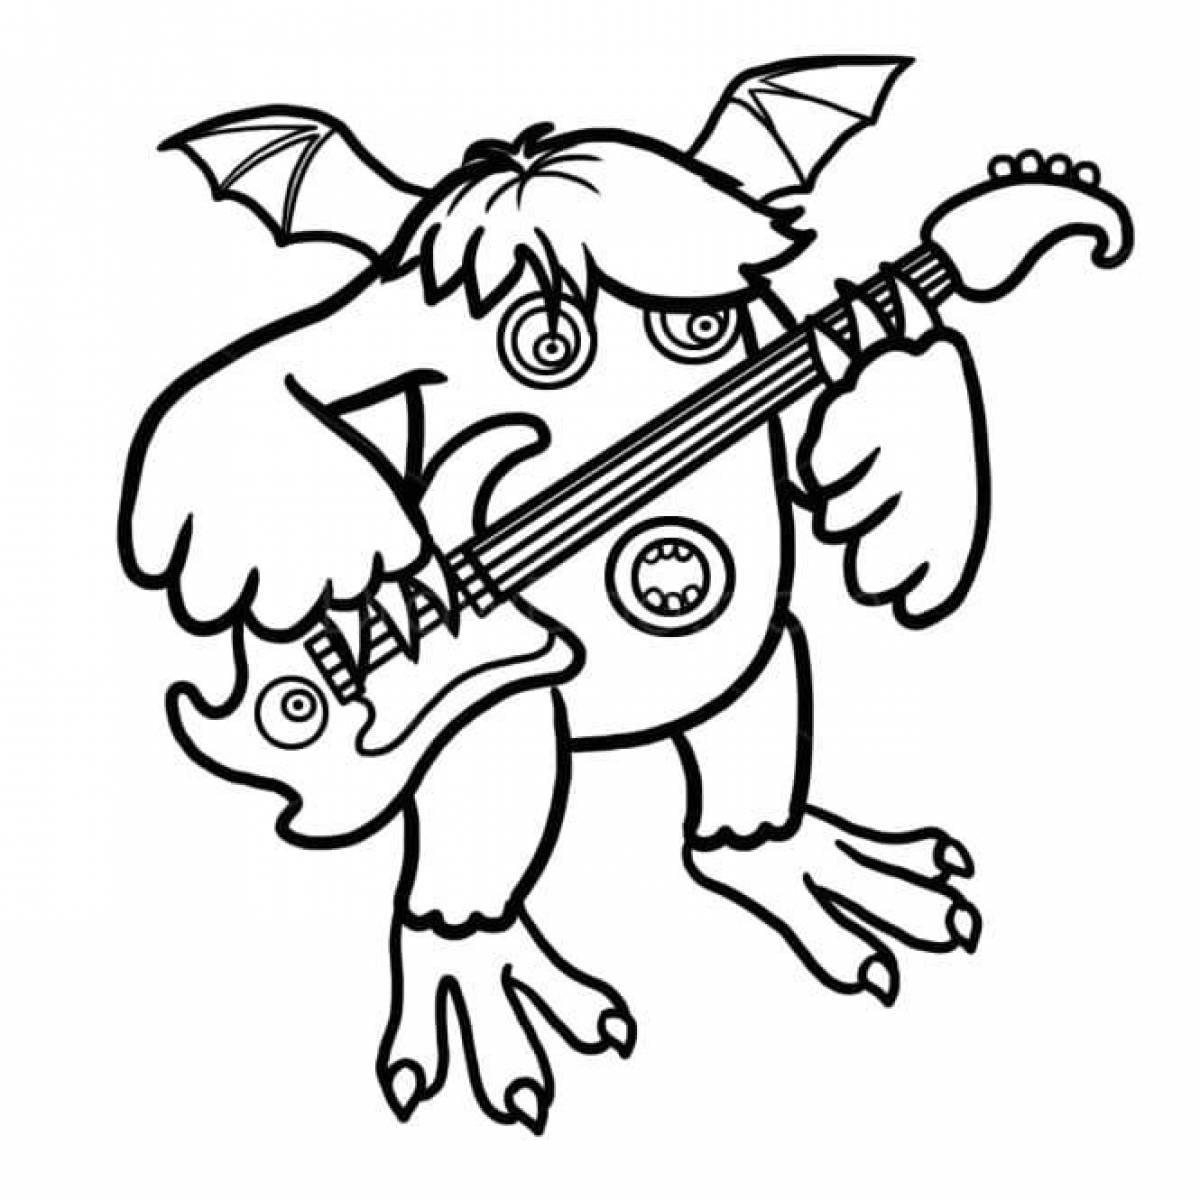 Glowing singing monsters coloring page